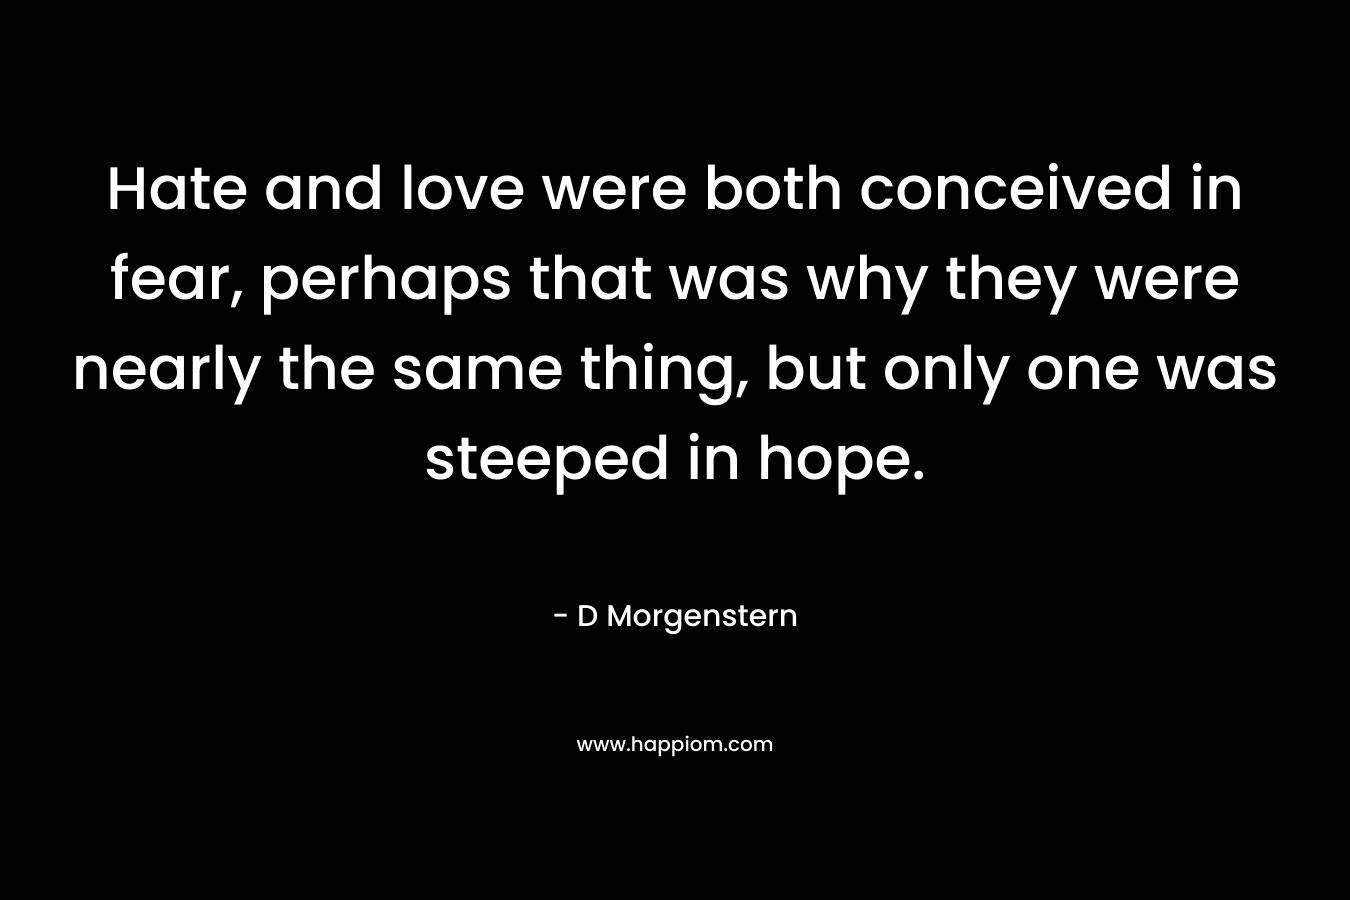 Hate and love were both conceived in fear, perhaps that was why they were nearly the same thing, but only one was steeped in hope.